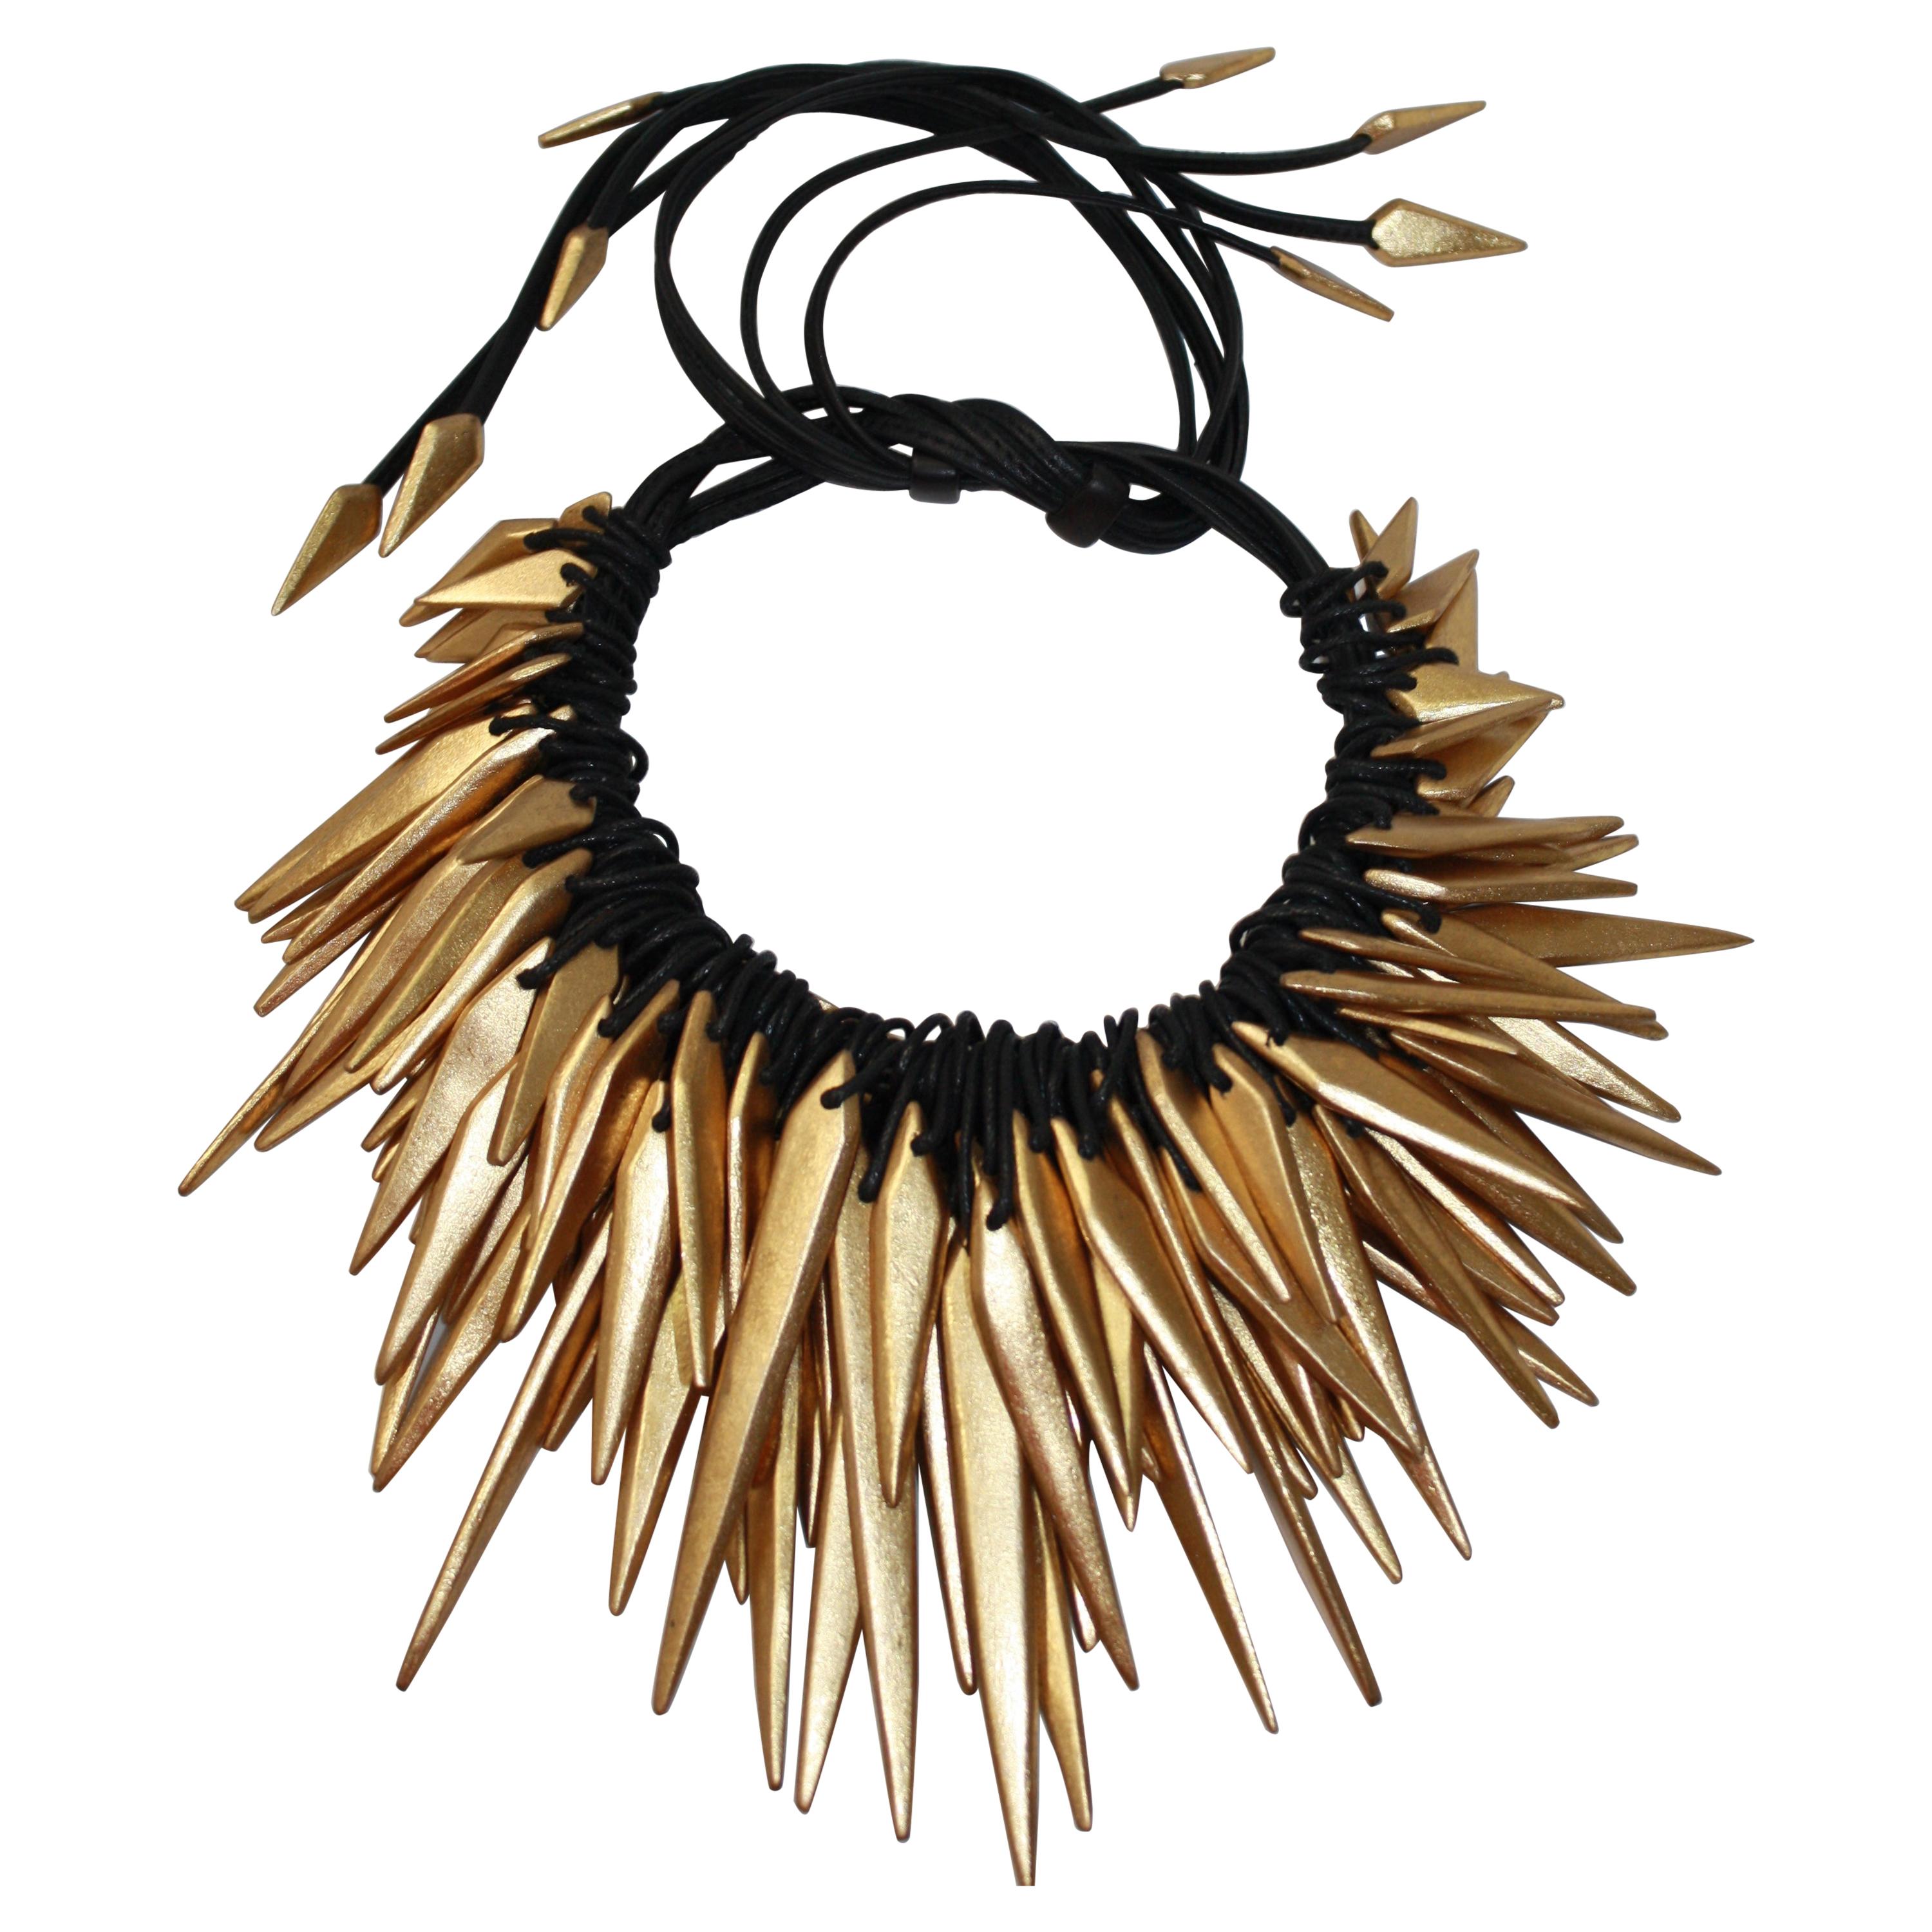 Monies Acacia Wood, Gold Foil and Leather Choker